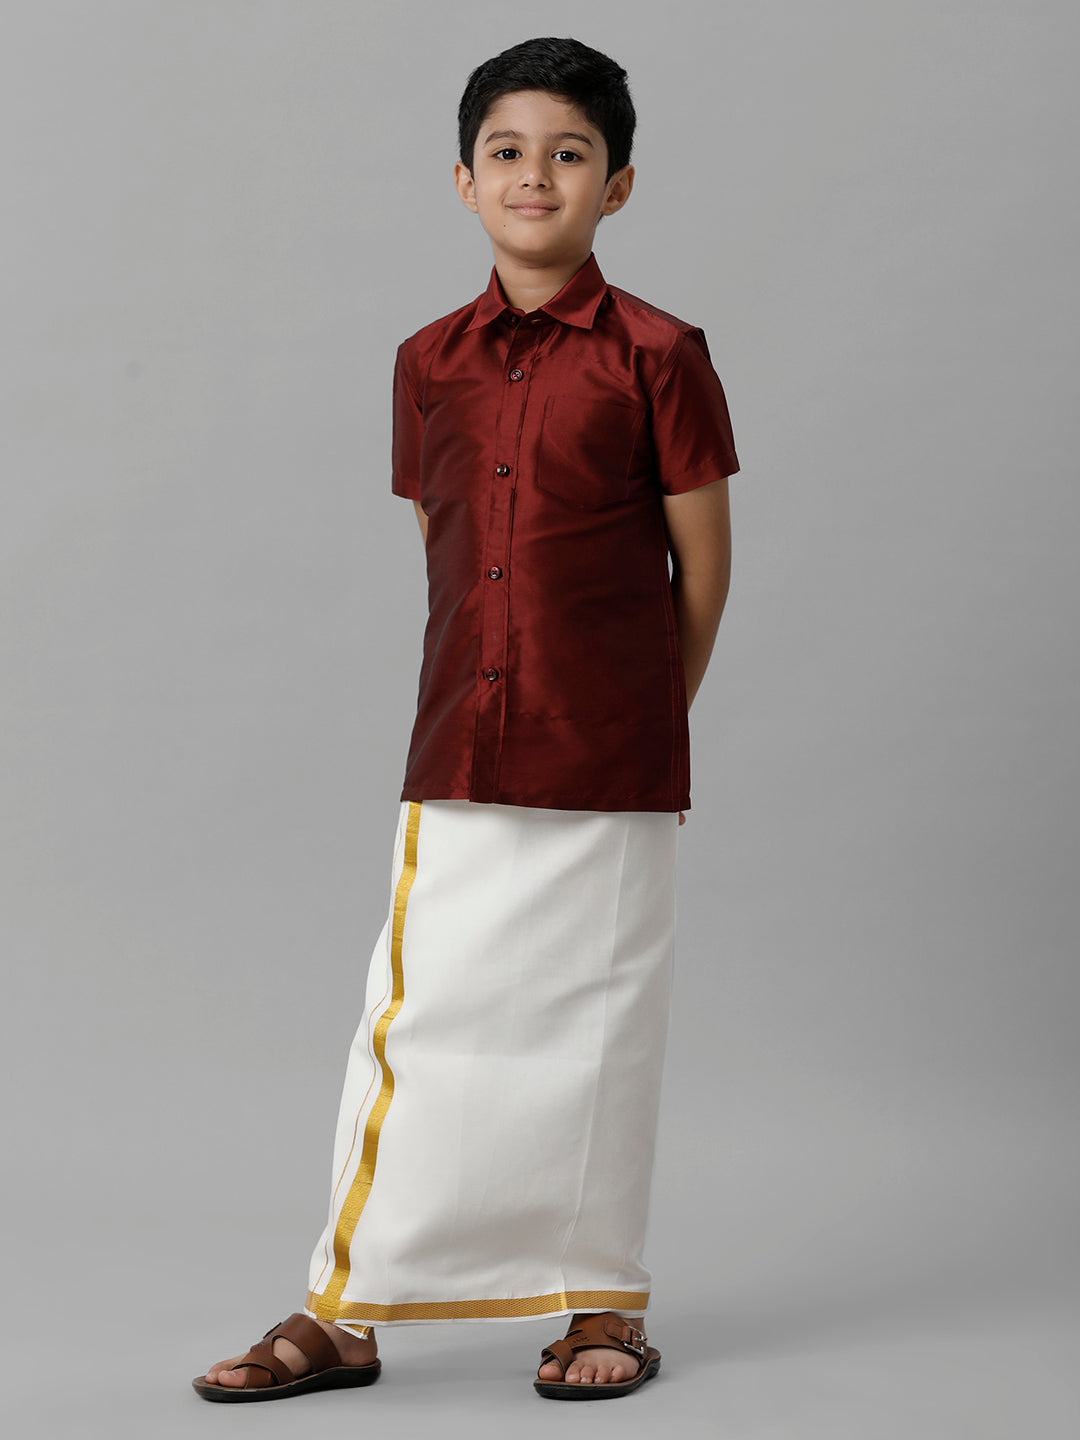 Boys Silk Cotton Maroon Half Sleeves Shirt with Adjustable Cream Dhoti Combo K7-Front view